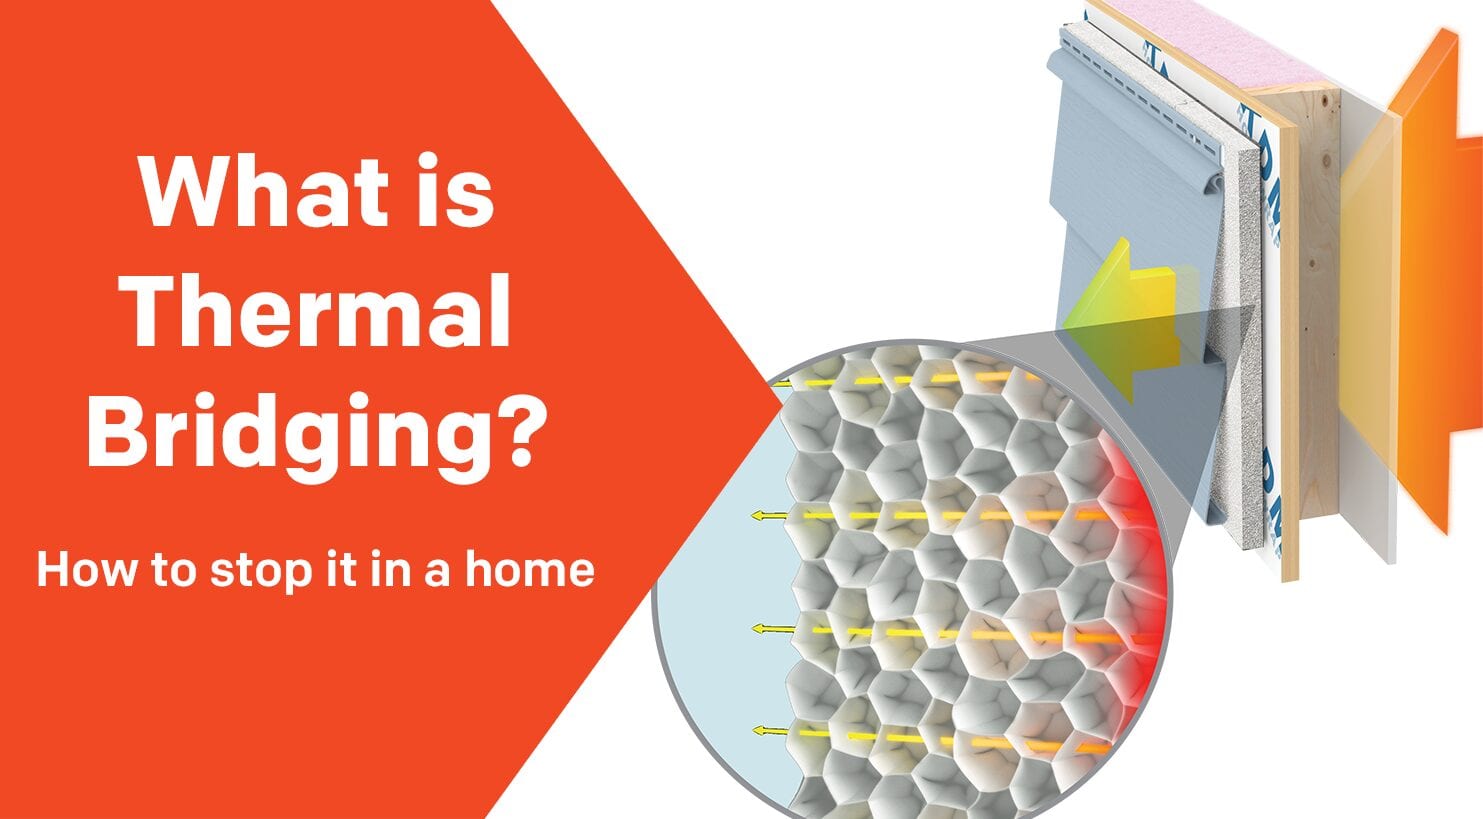 What is Thermal Bridging, and How to Stop It In a Home